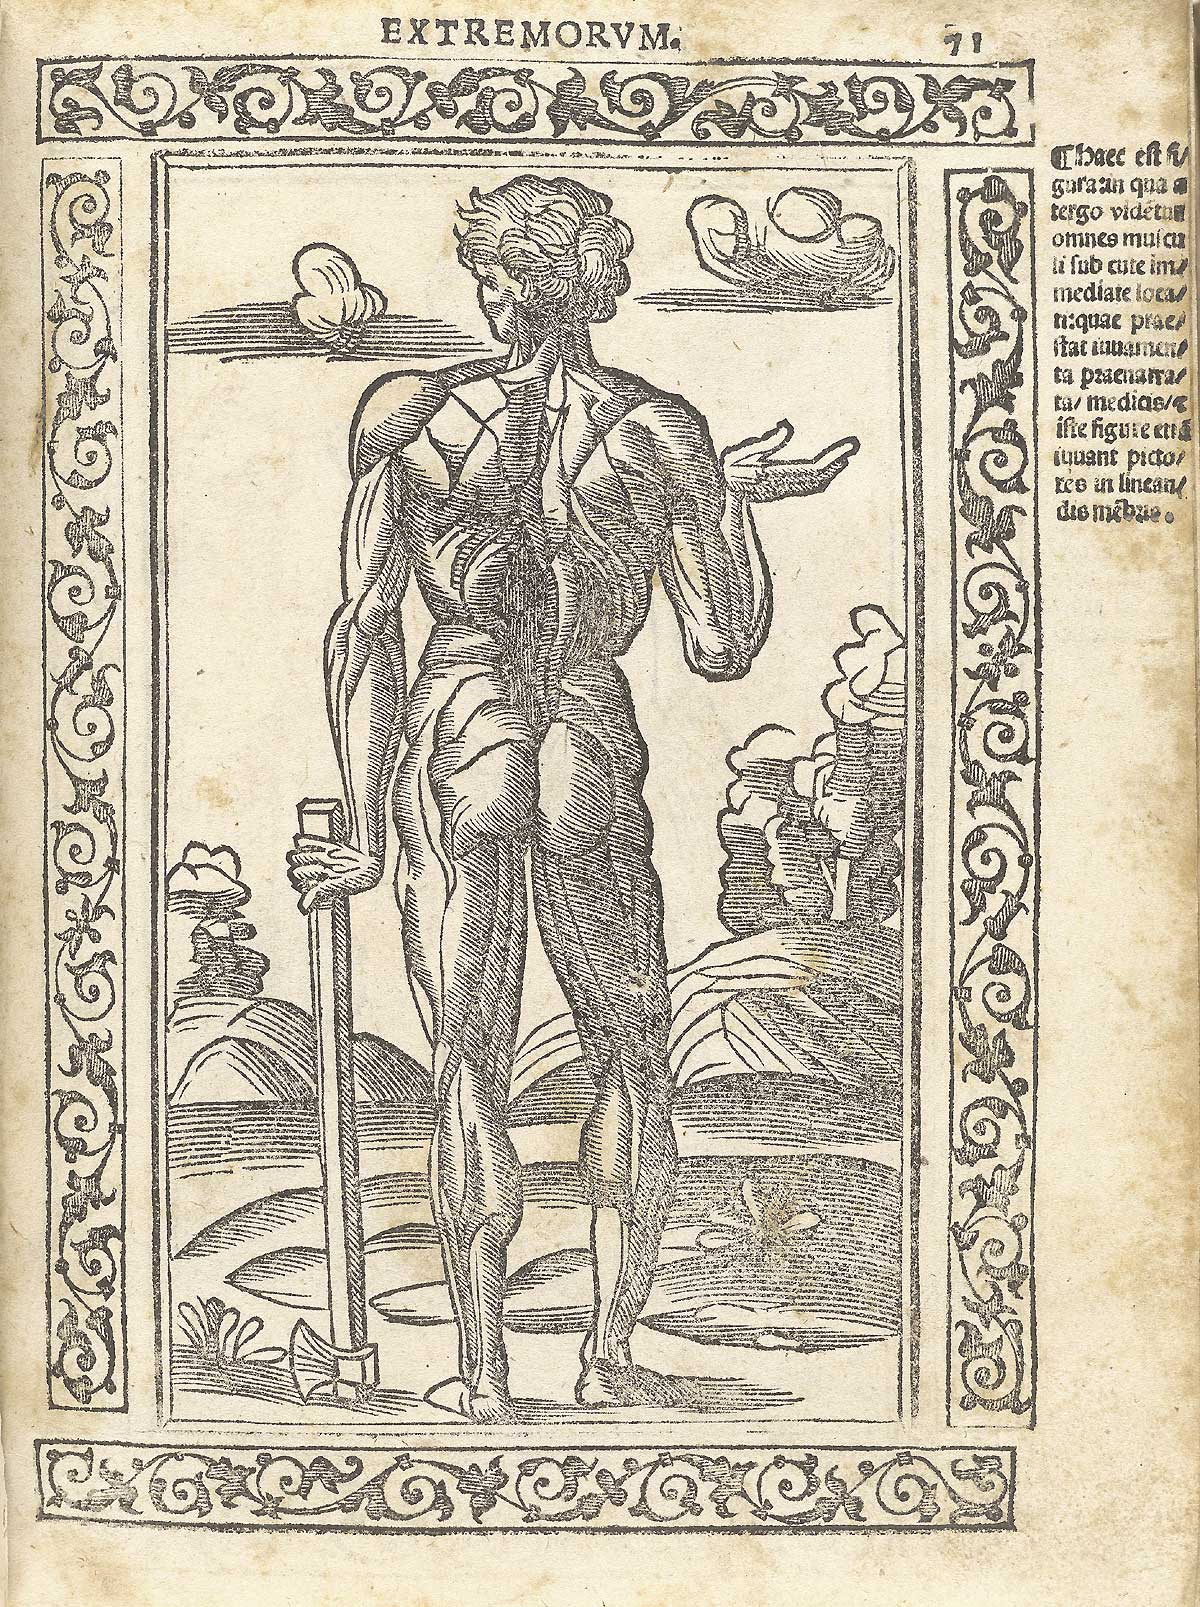 Woodcut nude male figure showing musculature of the back of the body, standing in a pastoral setting with right hand holding a cane; with a woodcut border and text in Latin on the right side of page, from Berengario da Carpi’s Isagogae breues, Bologna, 1523, NLM Call no. WZ 240 B488i 1523.